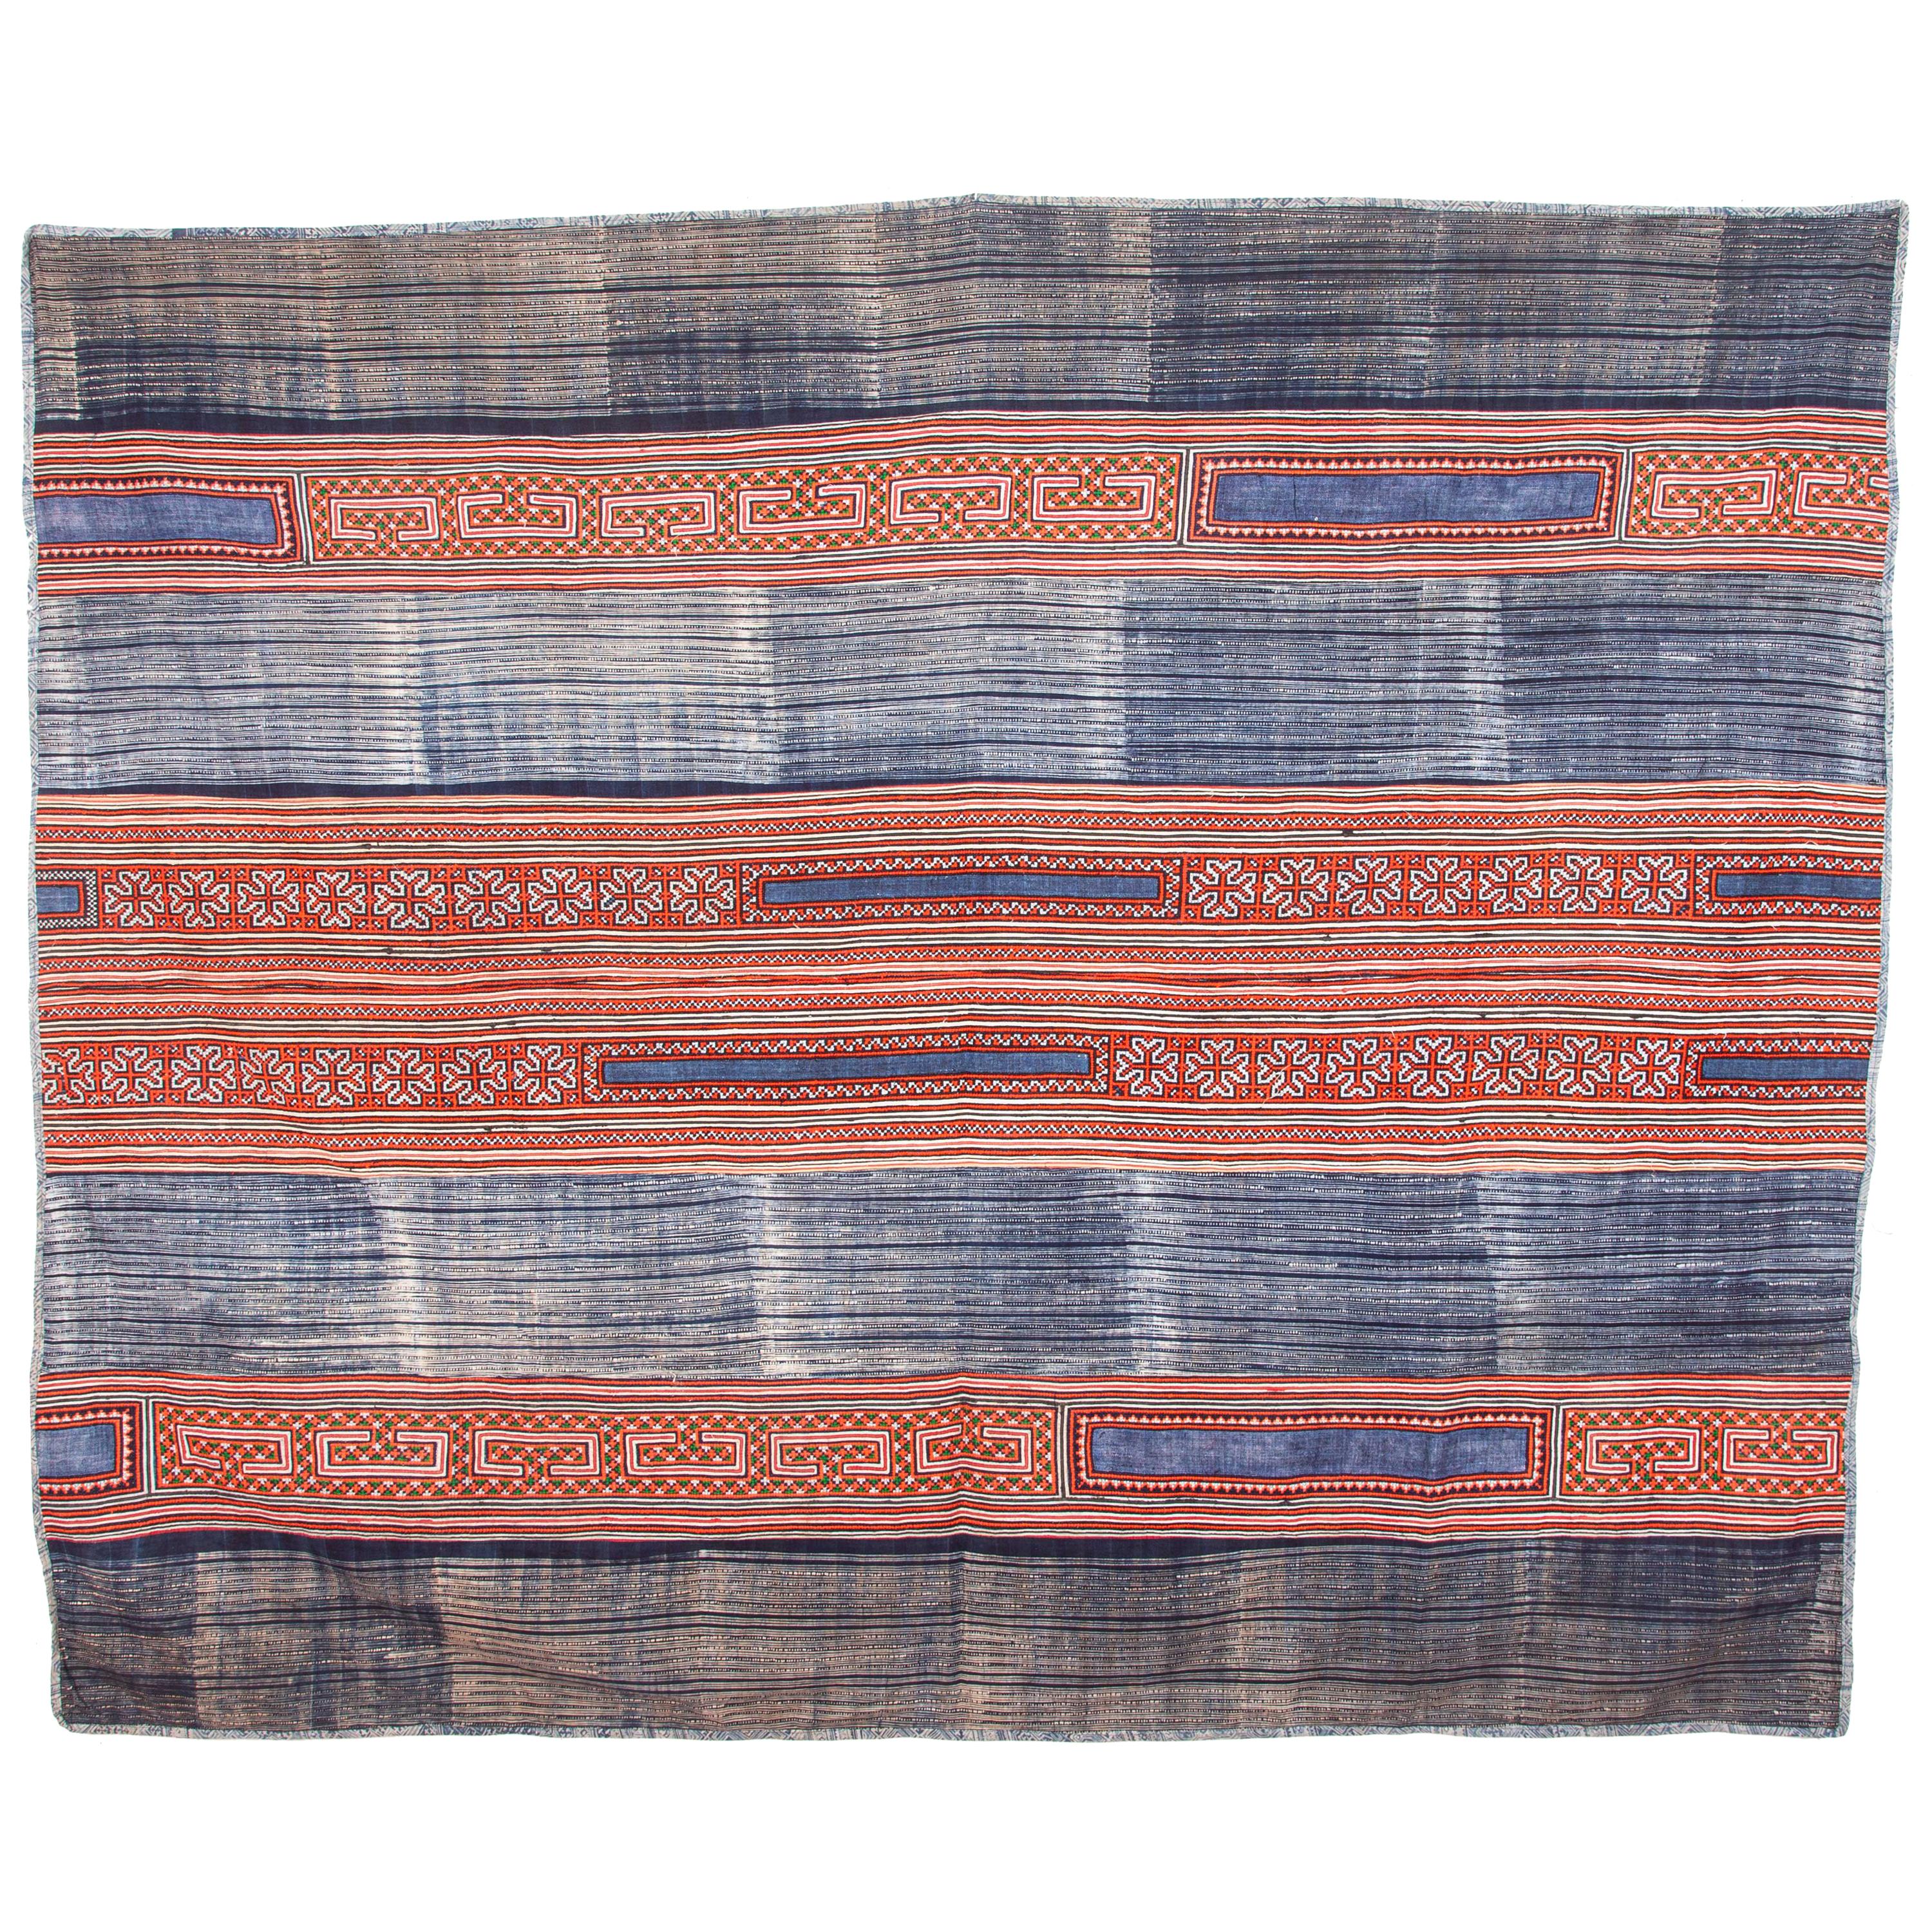 Hmong Batik and Embroidered Blanket with Indigo Color, Mid-20th Century